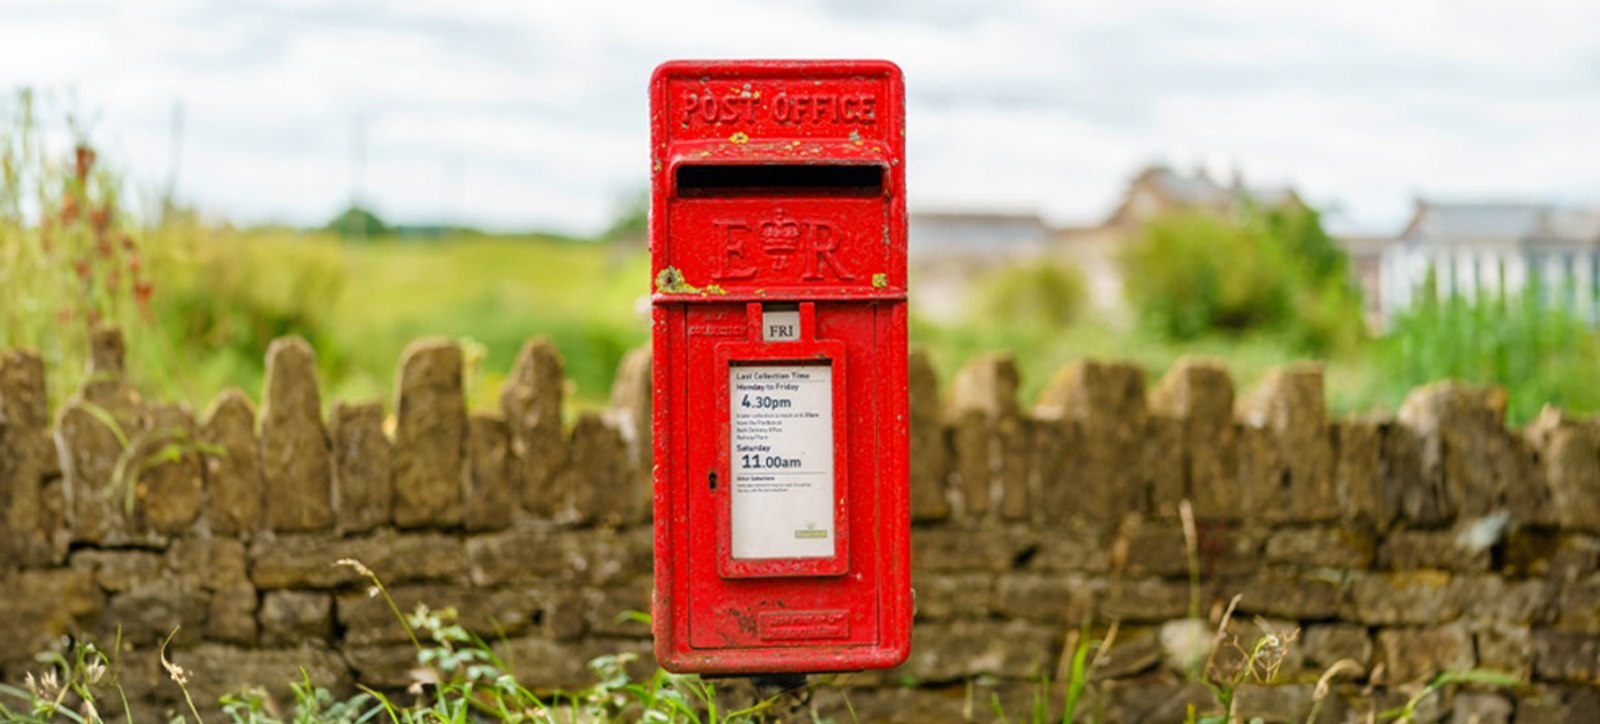 A photograph of a weathered Royal Mail post box in front of a rural stone wall.